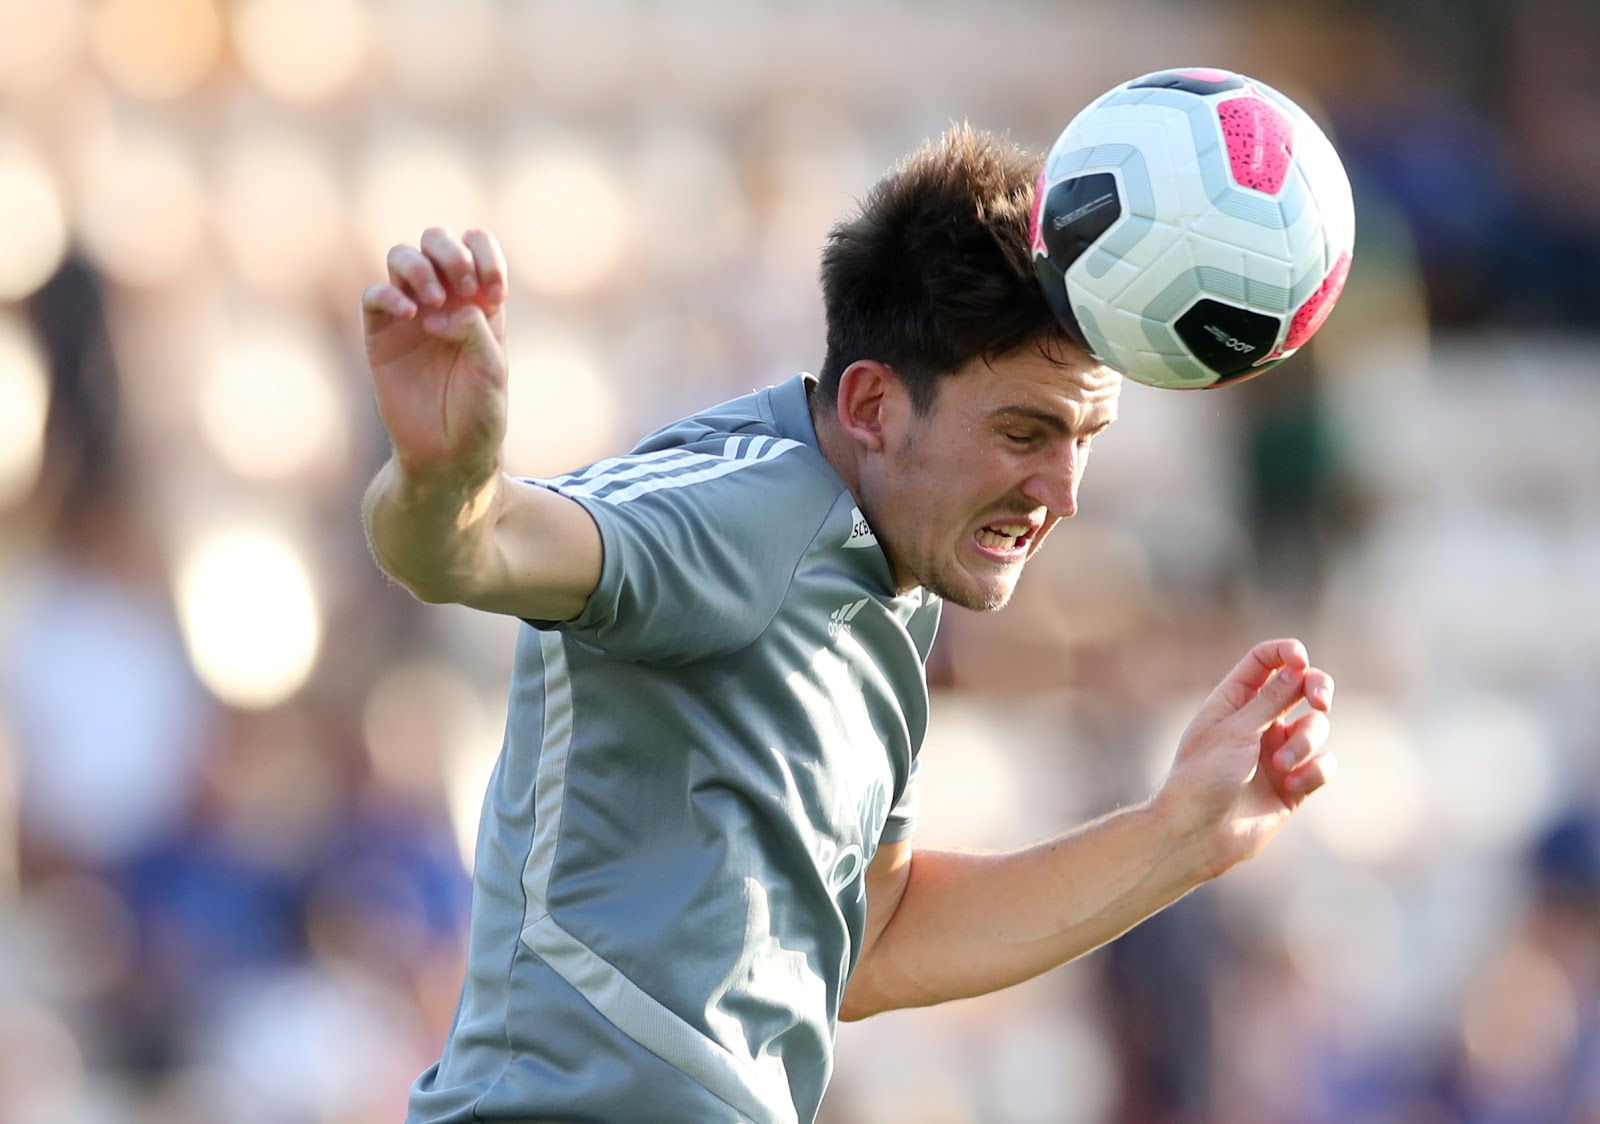 Ảnh Harry Maguire